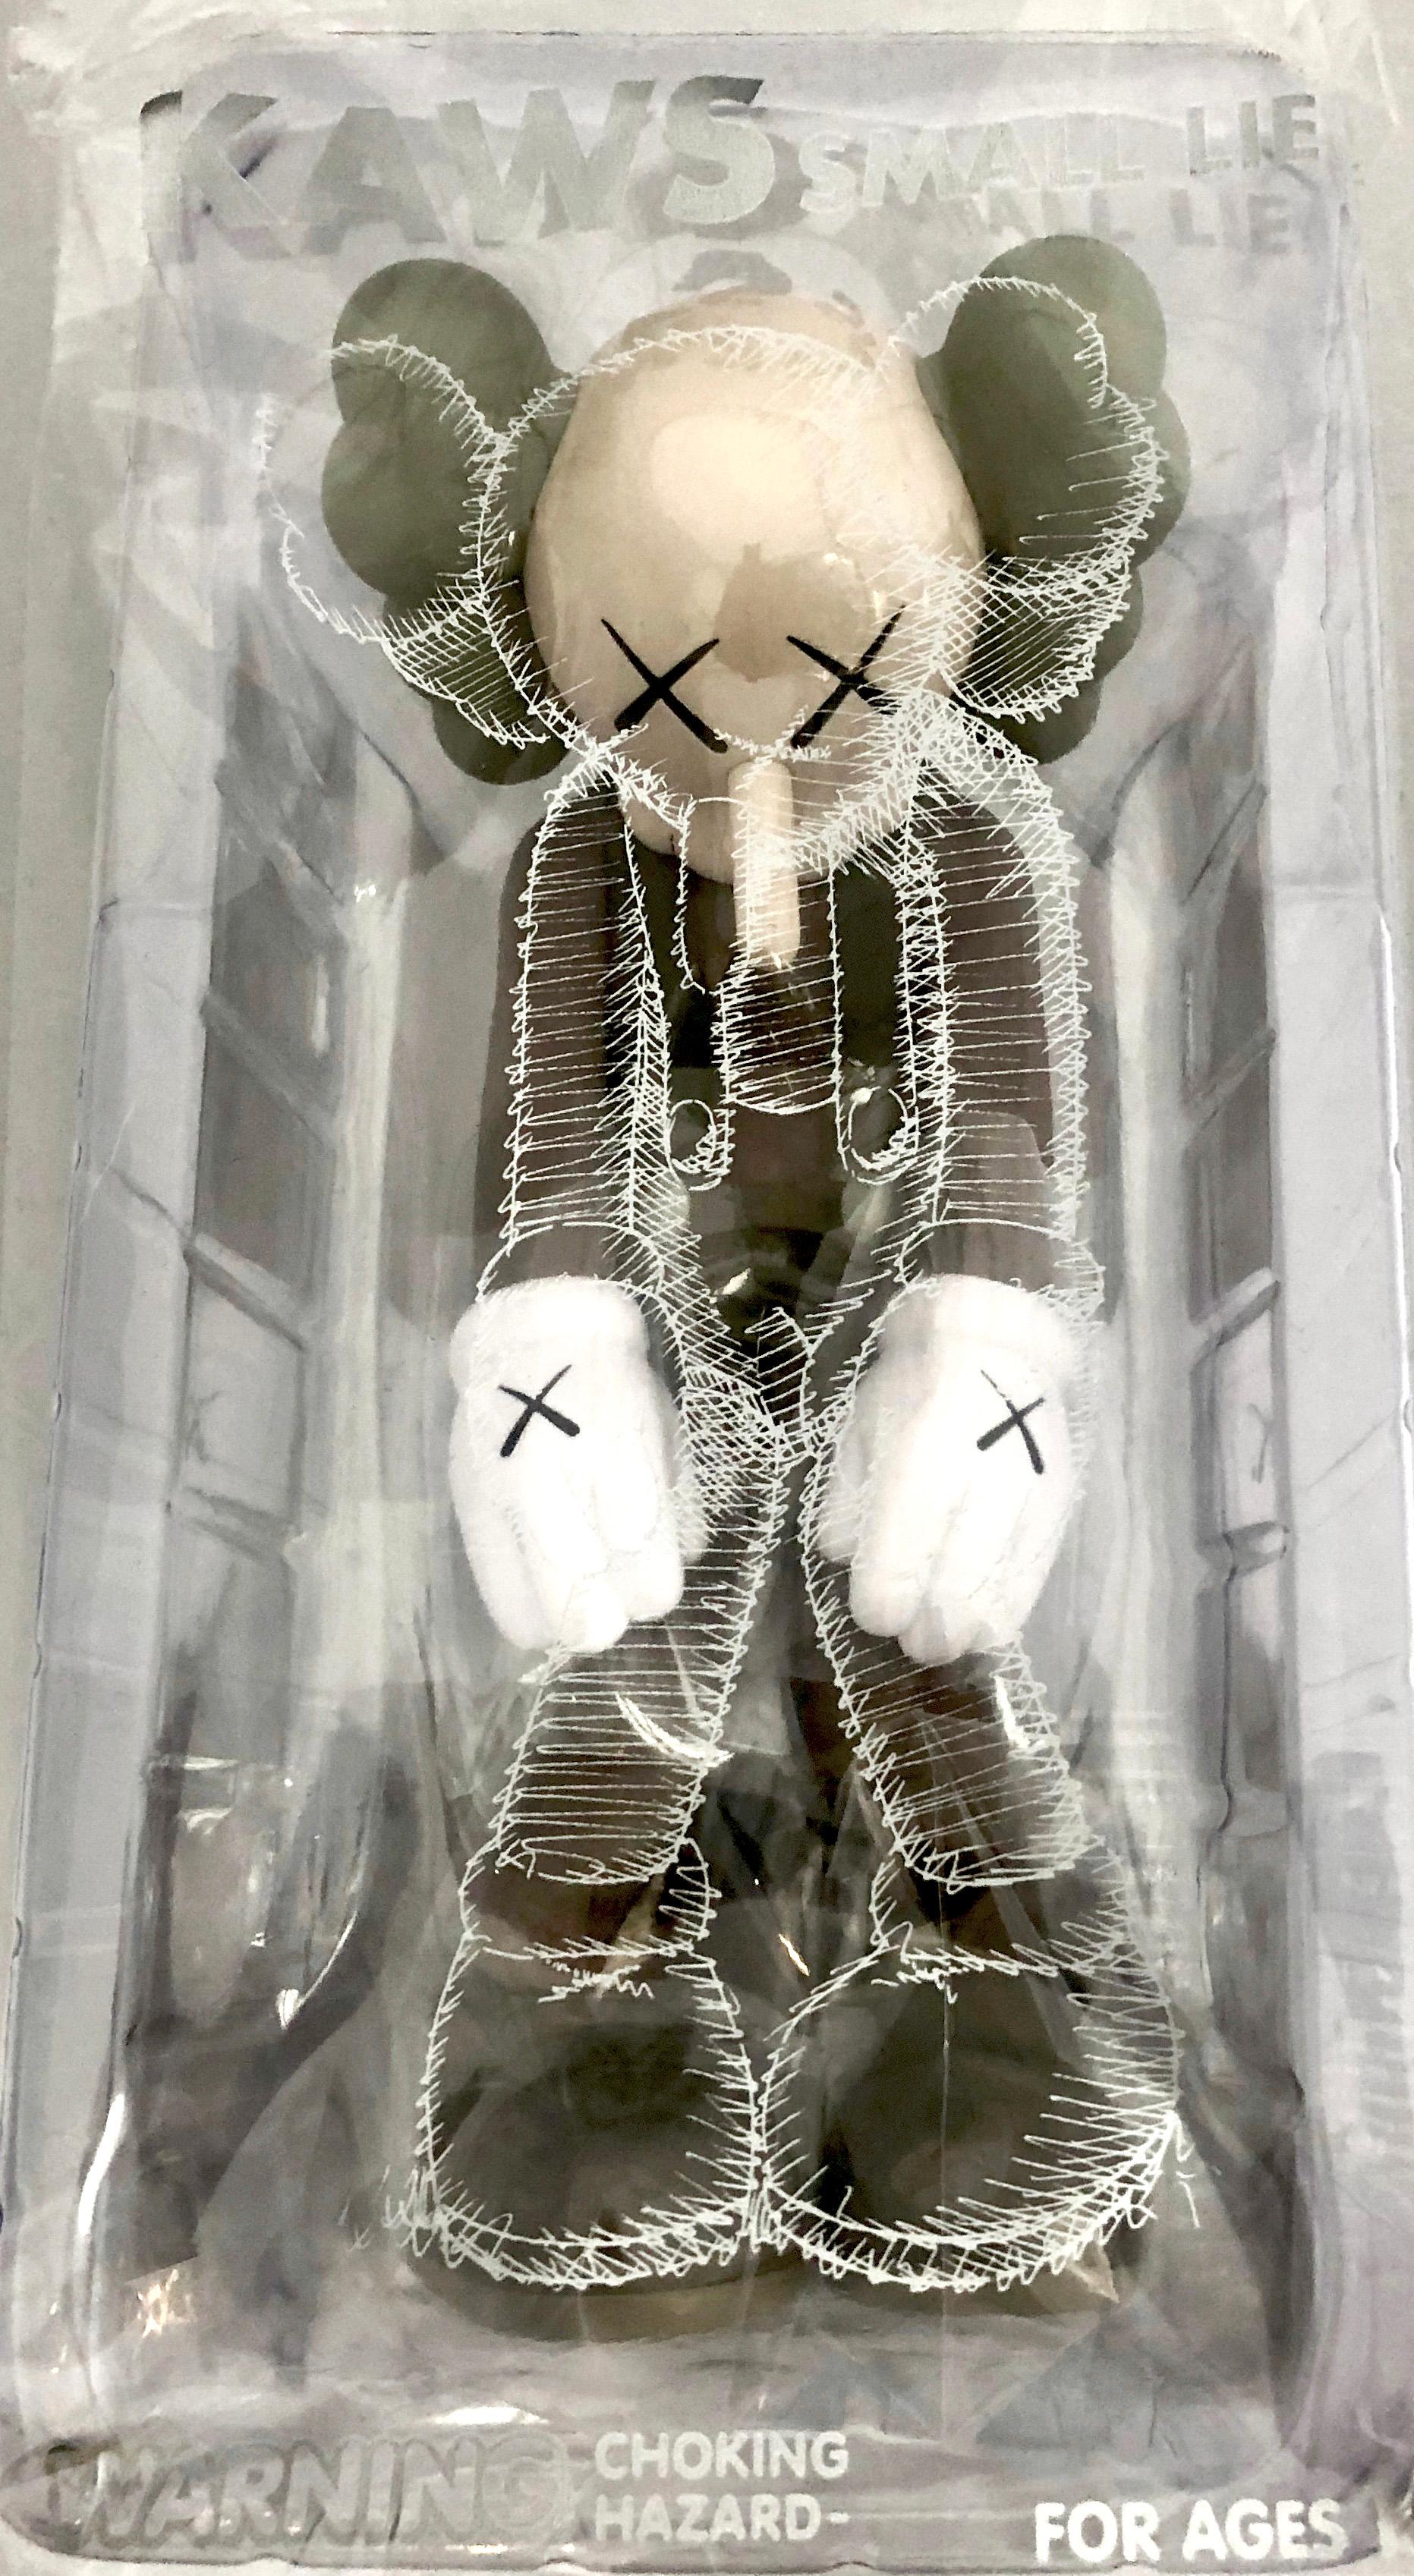 KAWS SMALL LIE 2017: Set of 2 works. Each new and sealed in their original packaging. These KAWS figurative pieces are a rendition of Small Lie produced in collaboration with Qatar Museums, a 30-feet-tall sculpture constructed out of African